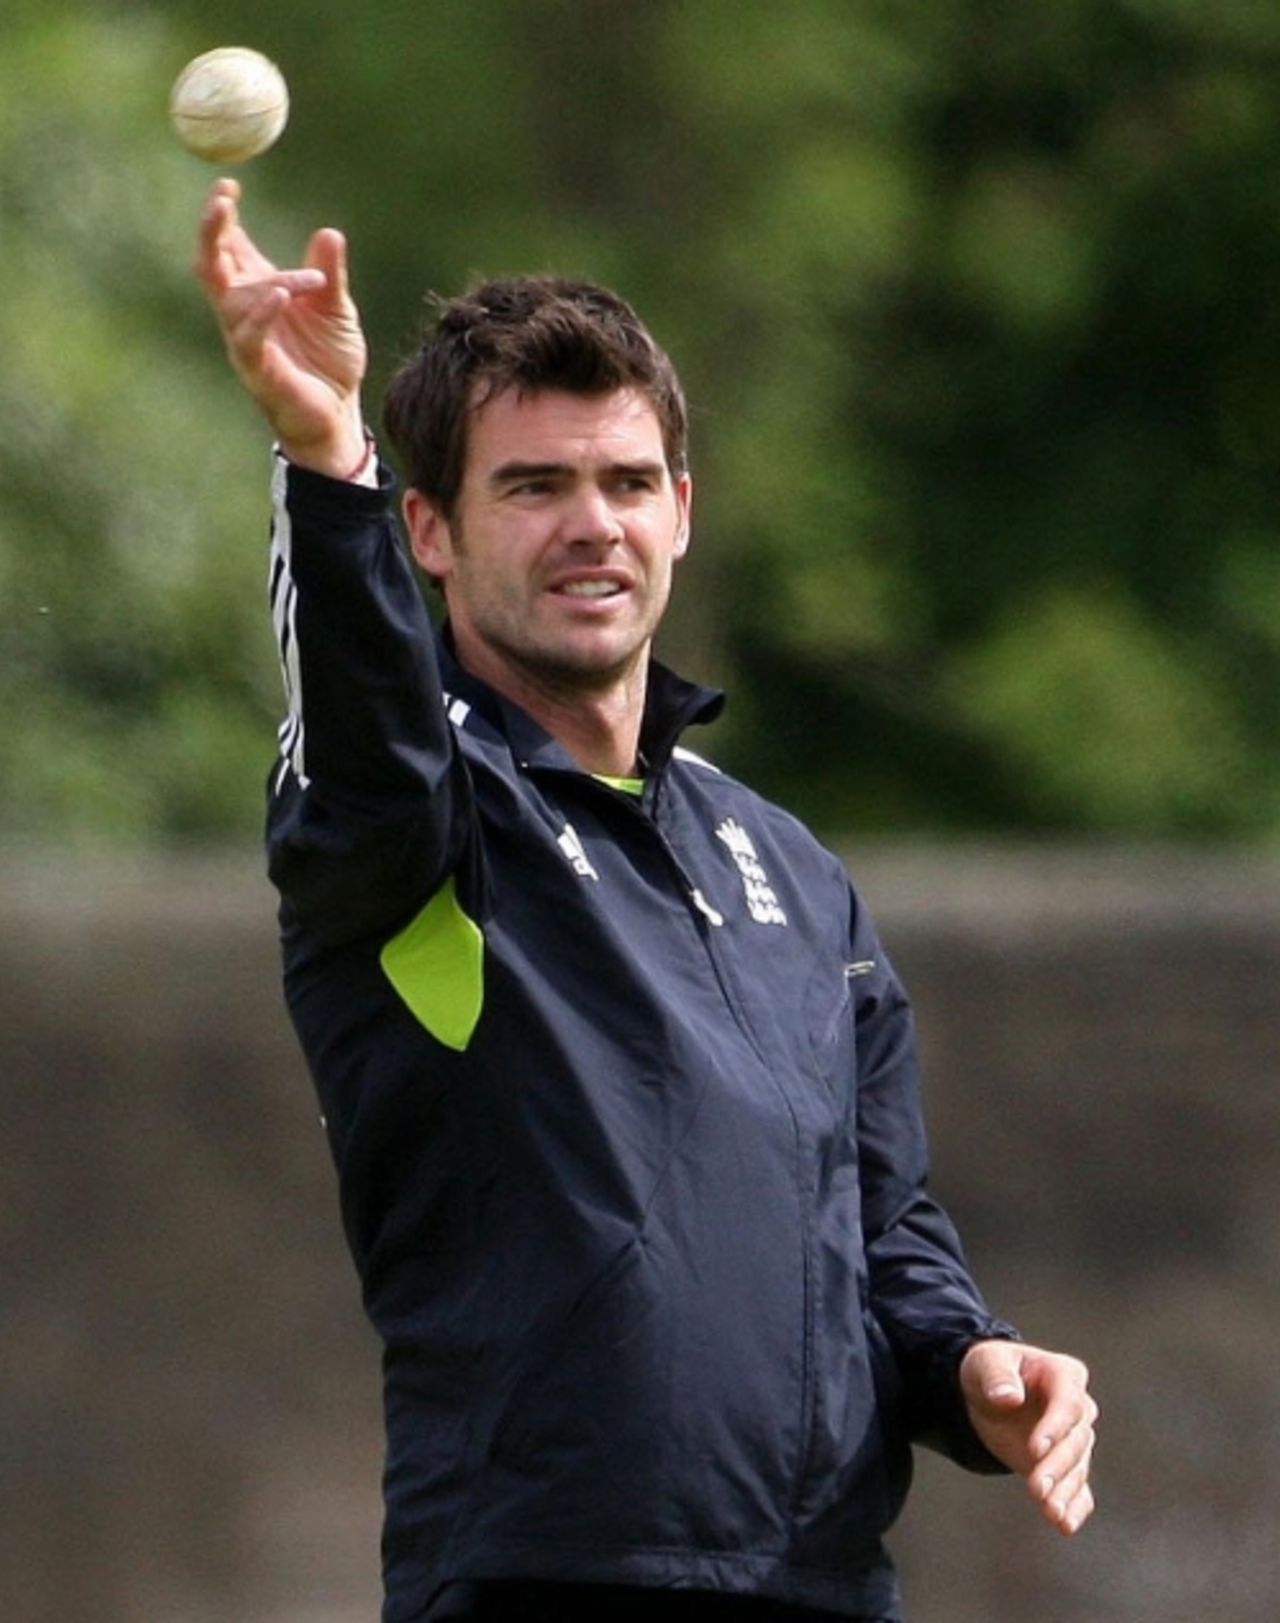 James Anderson in the nets ahead of England's game against Scotland in Edinburgh, June 18, 2010